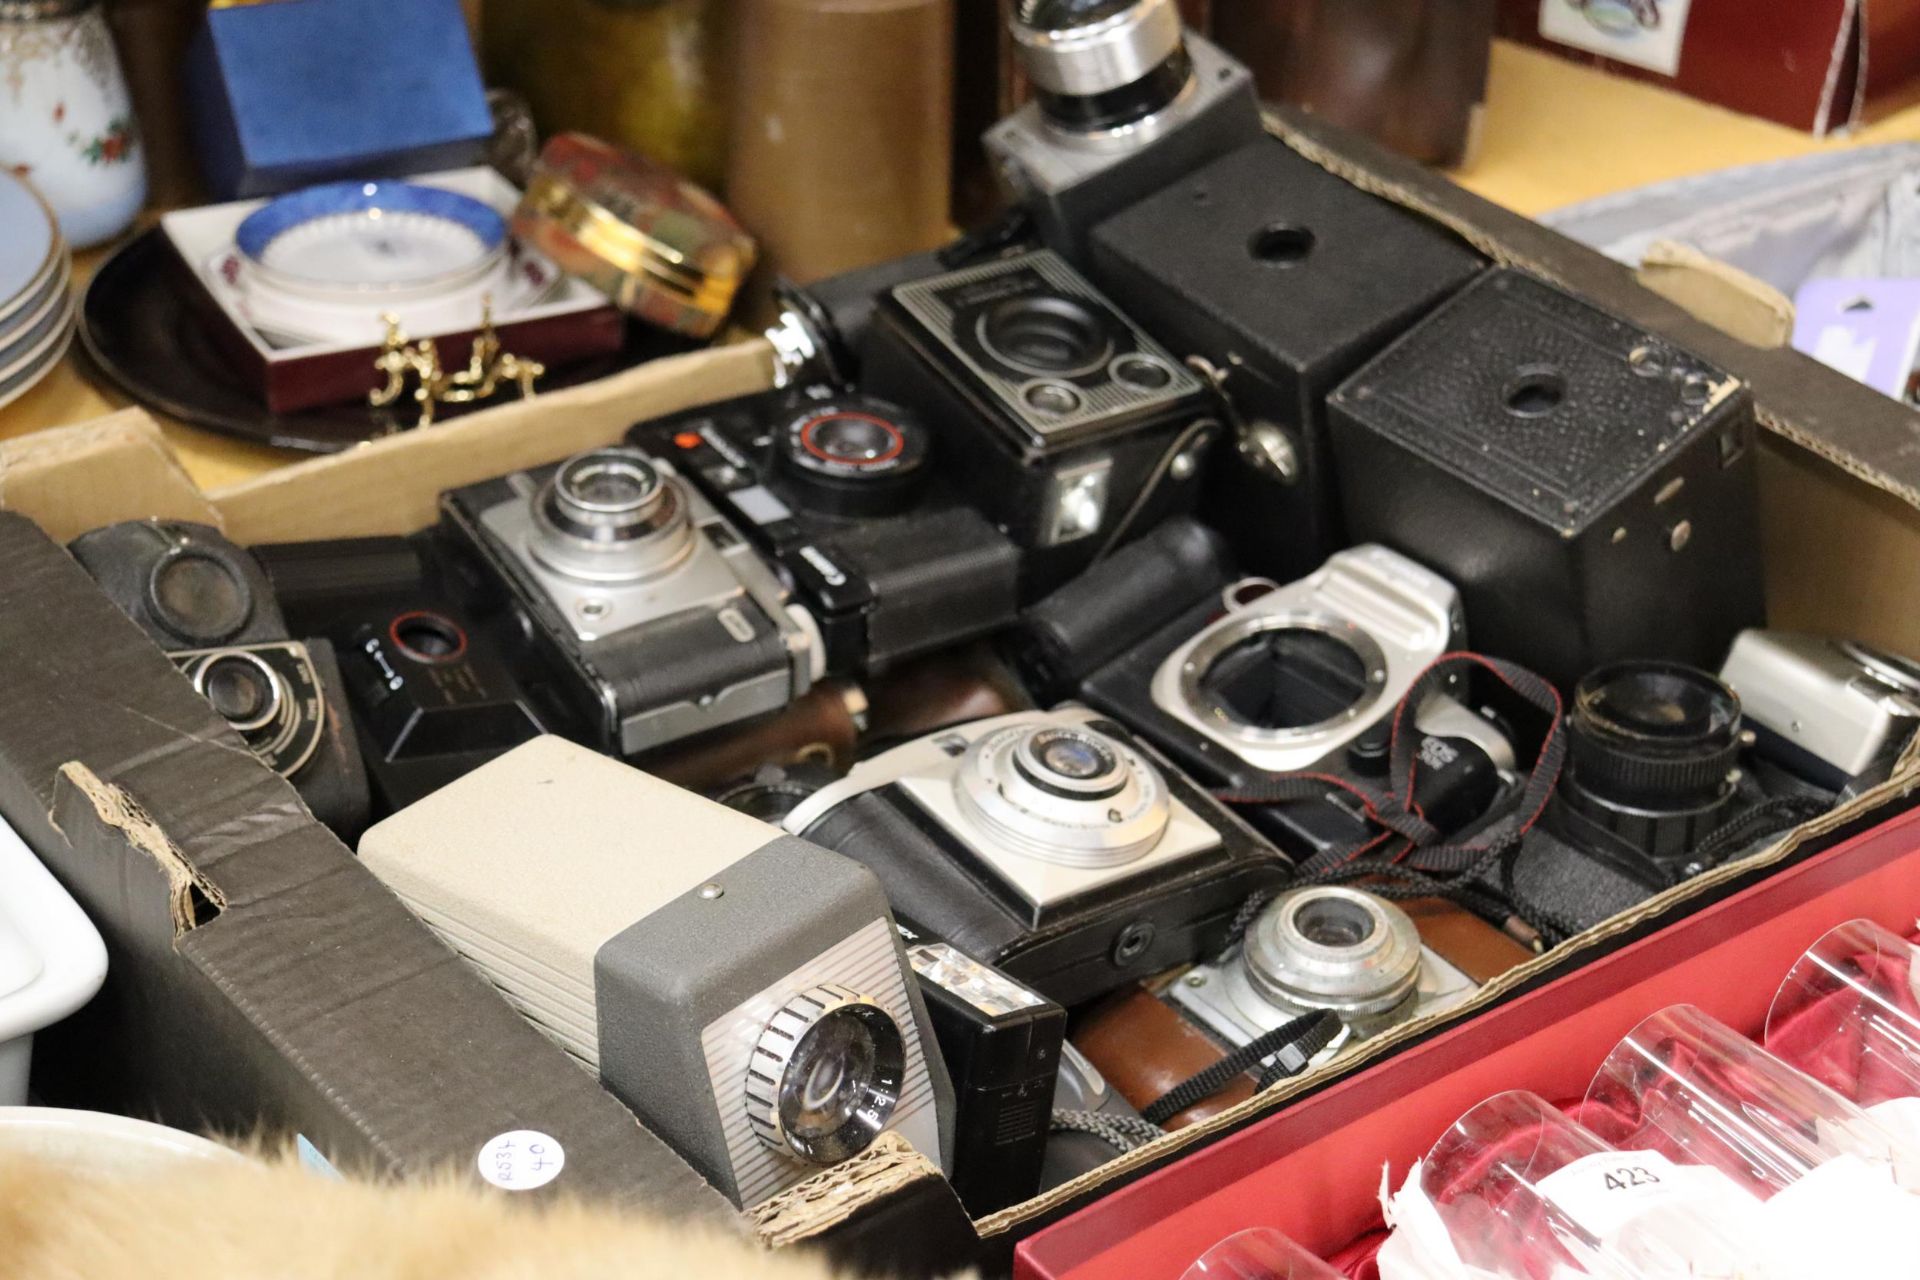 A LARGE QUANTITY OF VINTAGE CAMERAS TO INCLUDE CANON, ENSIGN, KODAK BROWNIE, ETC - 26 IN TOTAL - Image 9 of 9